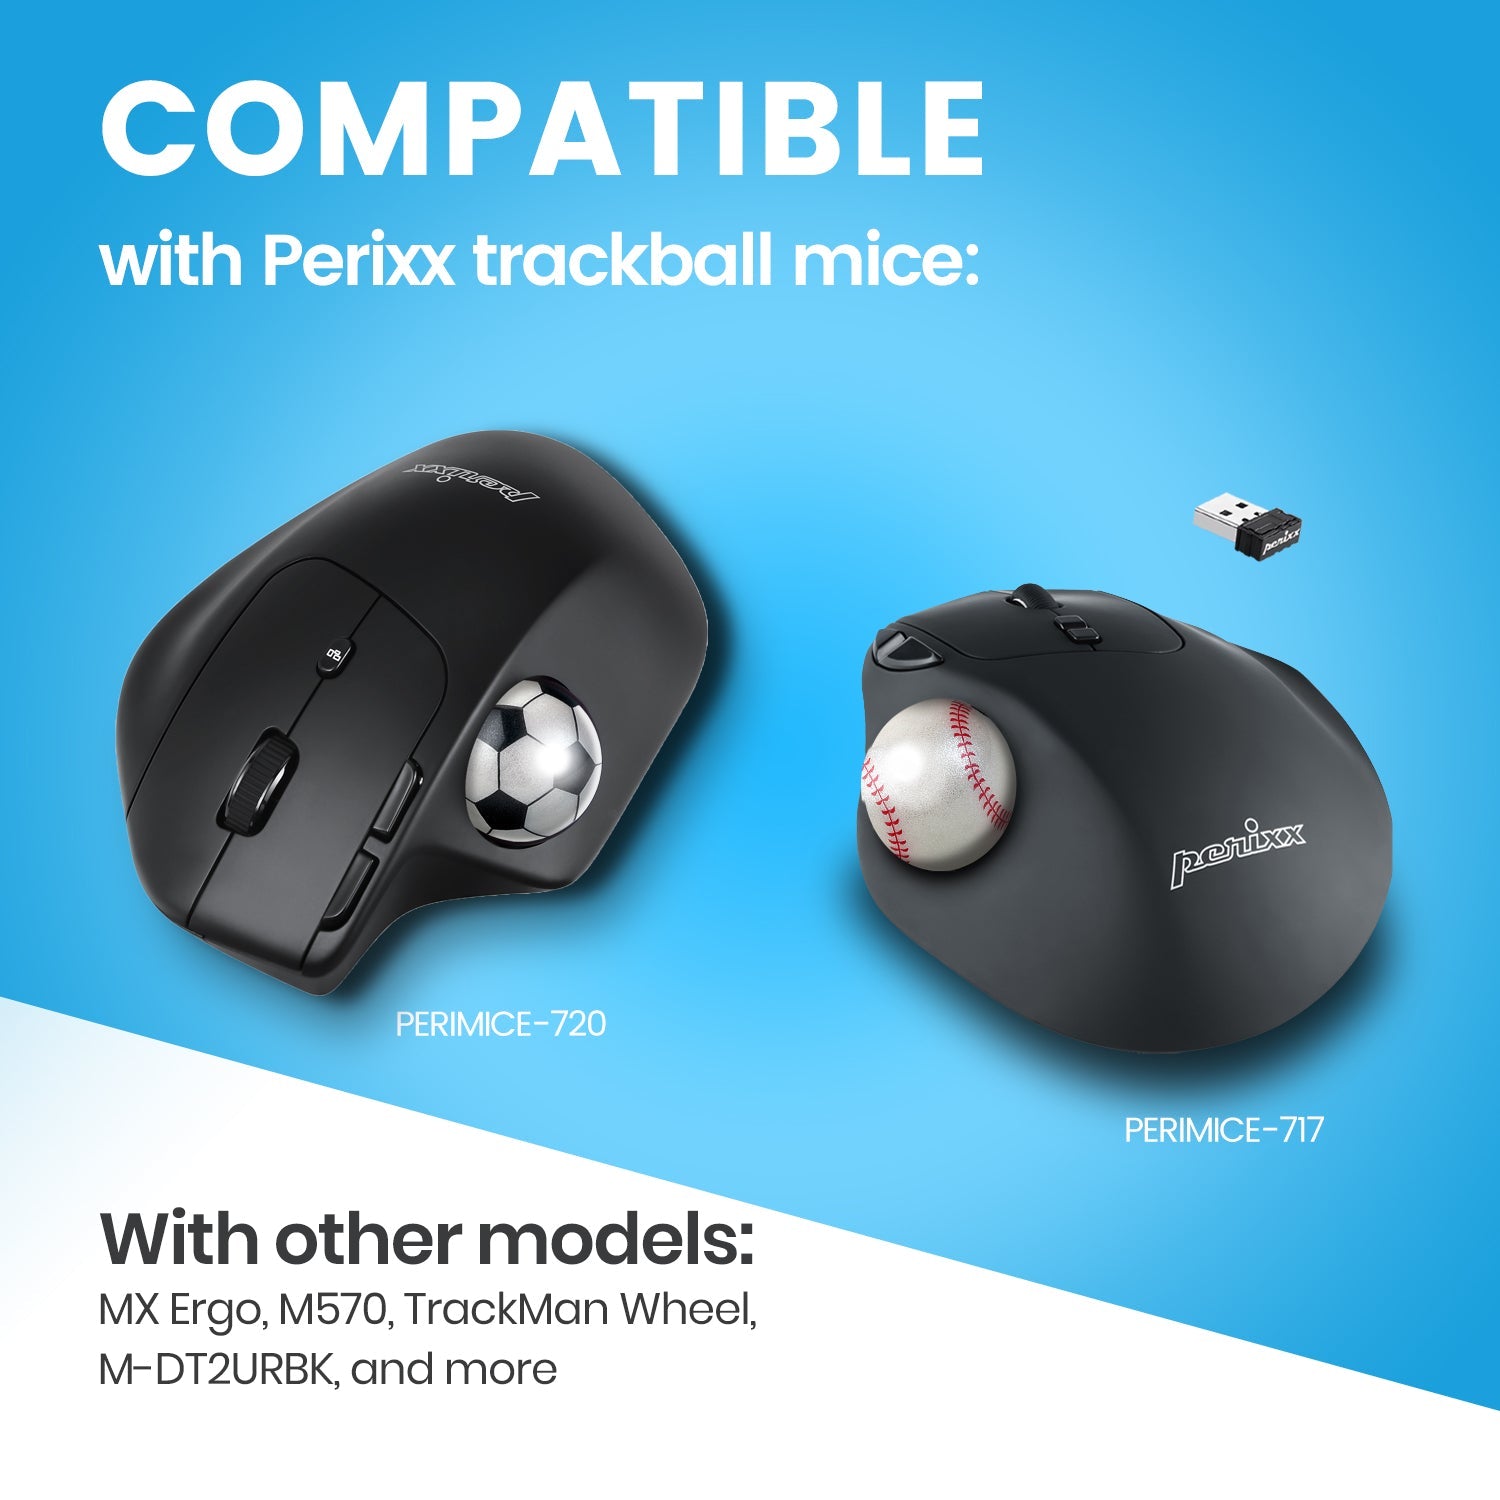 Perixx PERIPRO - 303X2F 1.34 Inches Sports Trackball - Fun Novelty Baseball and Soccer Design - Compatible for M570, M575, PERIMICE - 517/520/717/720, and Other 1.34inches Trackball Mouse - Perixx Europe